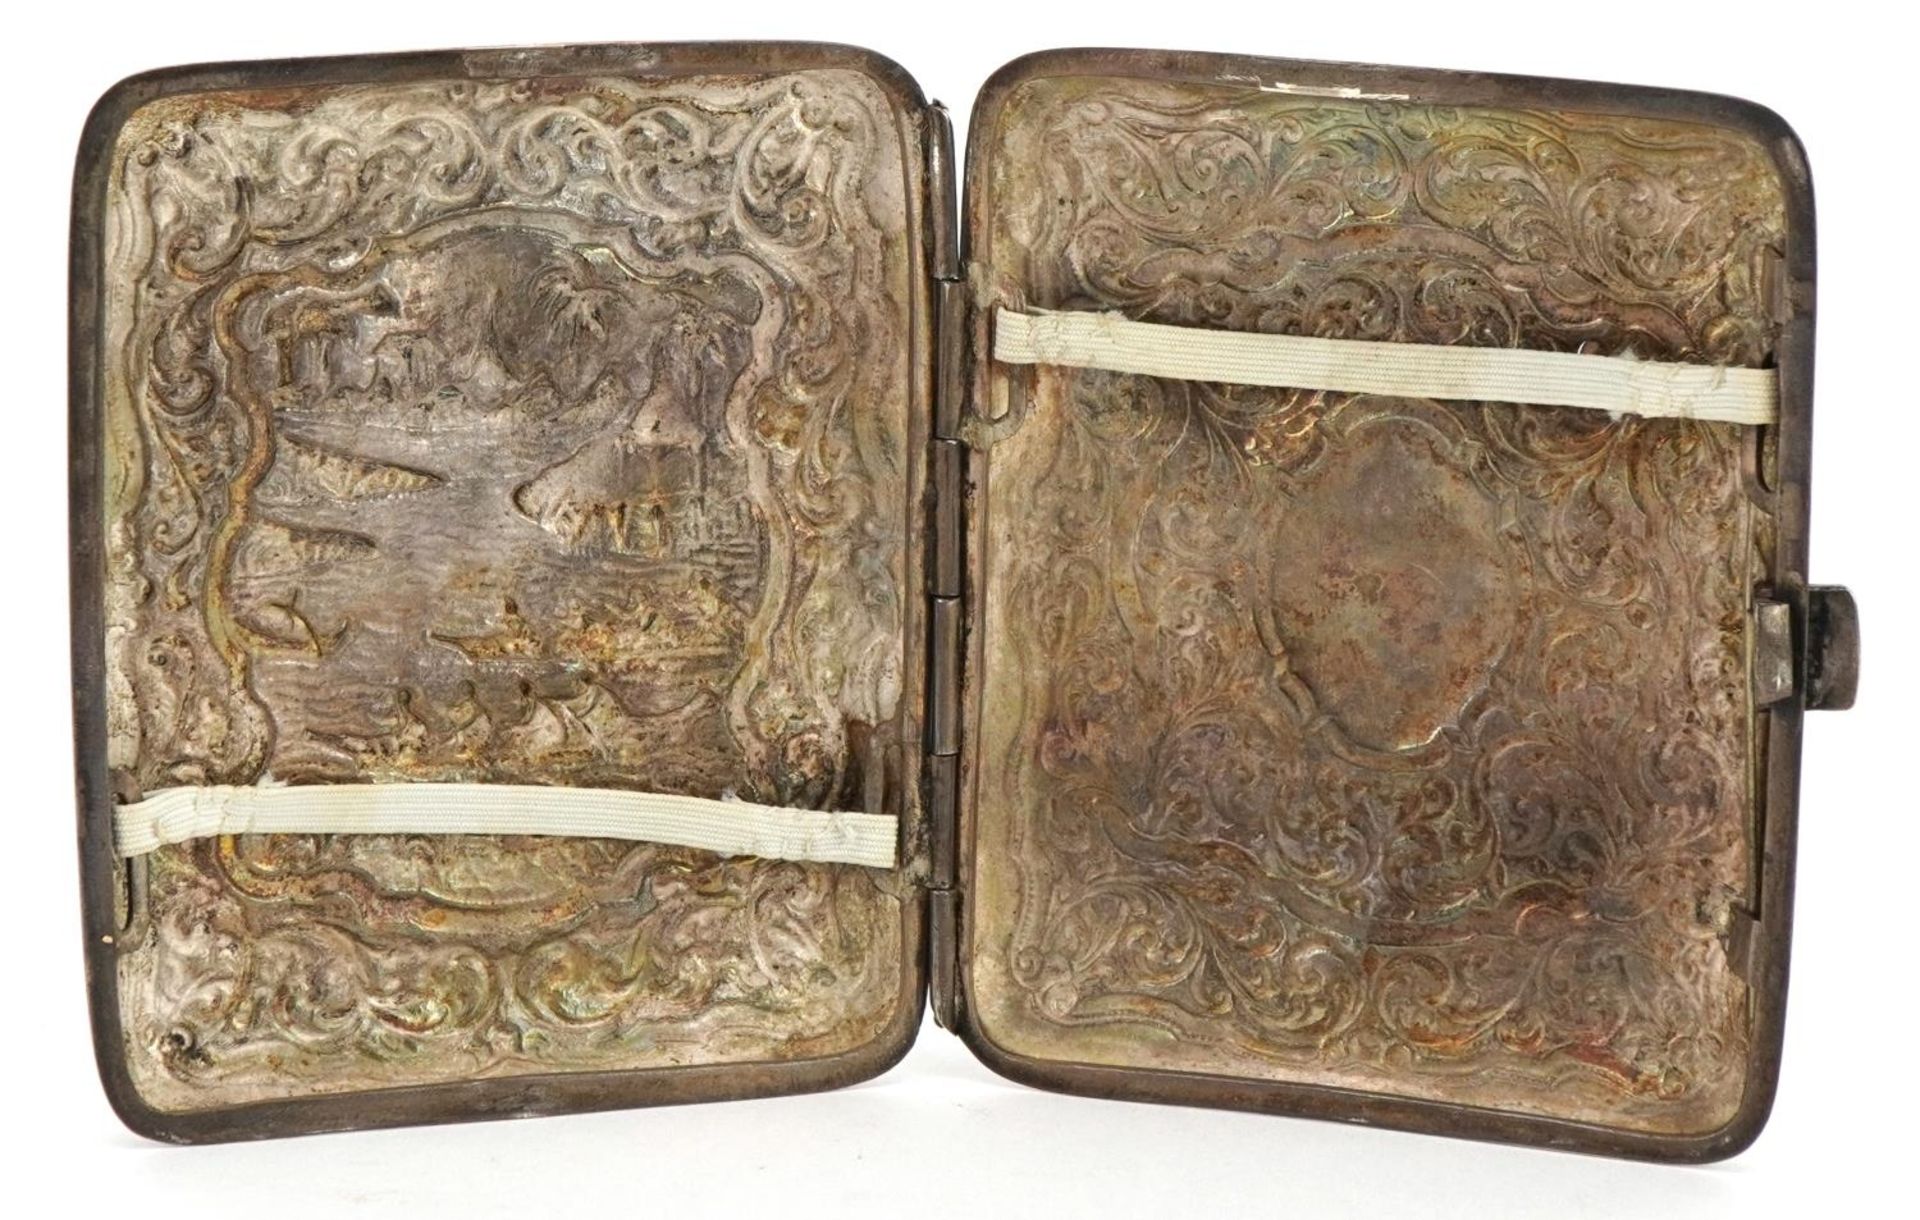 Unmarked Chinese rectangular silver cigarette case embossed with figures in rowing boats and - Image 2 of 3